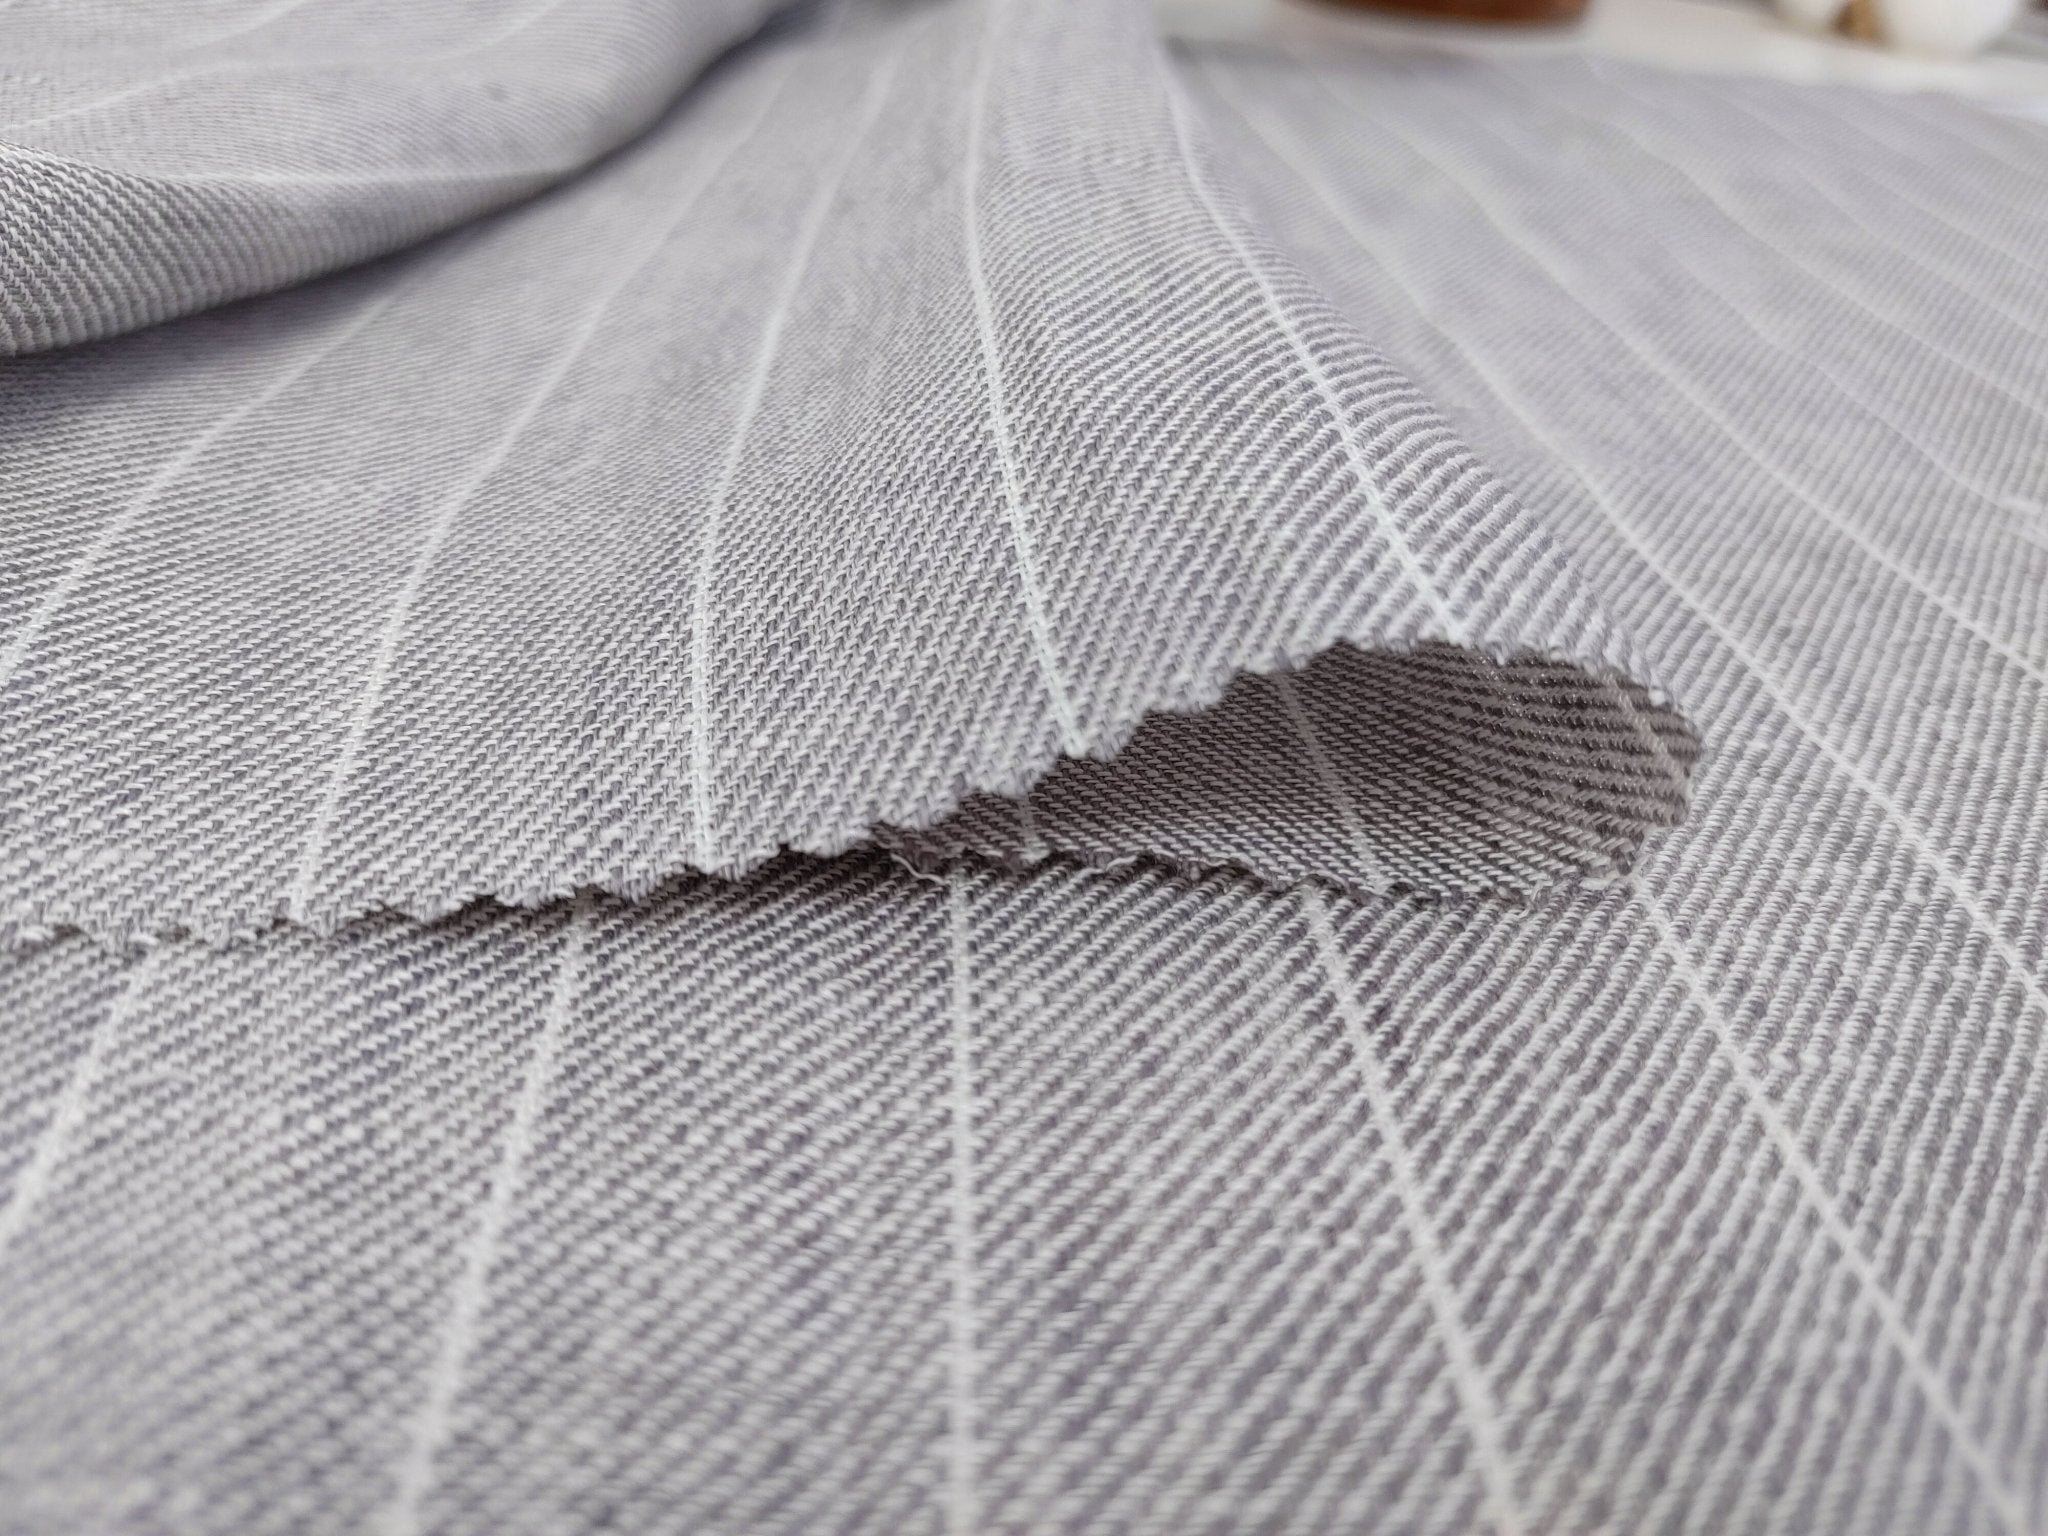 Gentle Grey Stripes: 100% Linen Chambray Twill Fabric 7614 - The Linen Lab - Grey